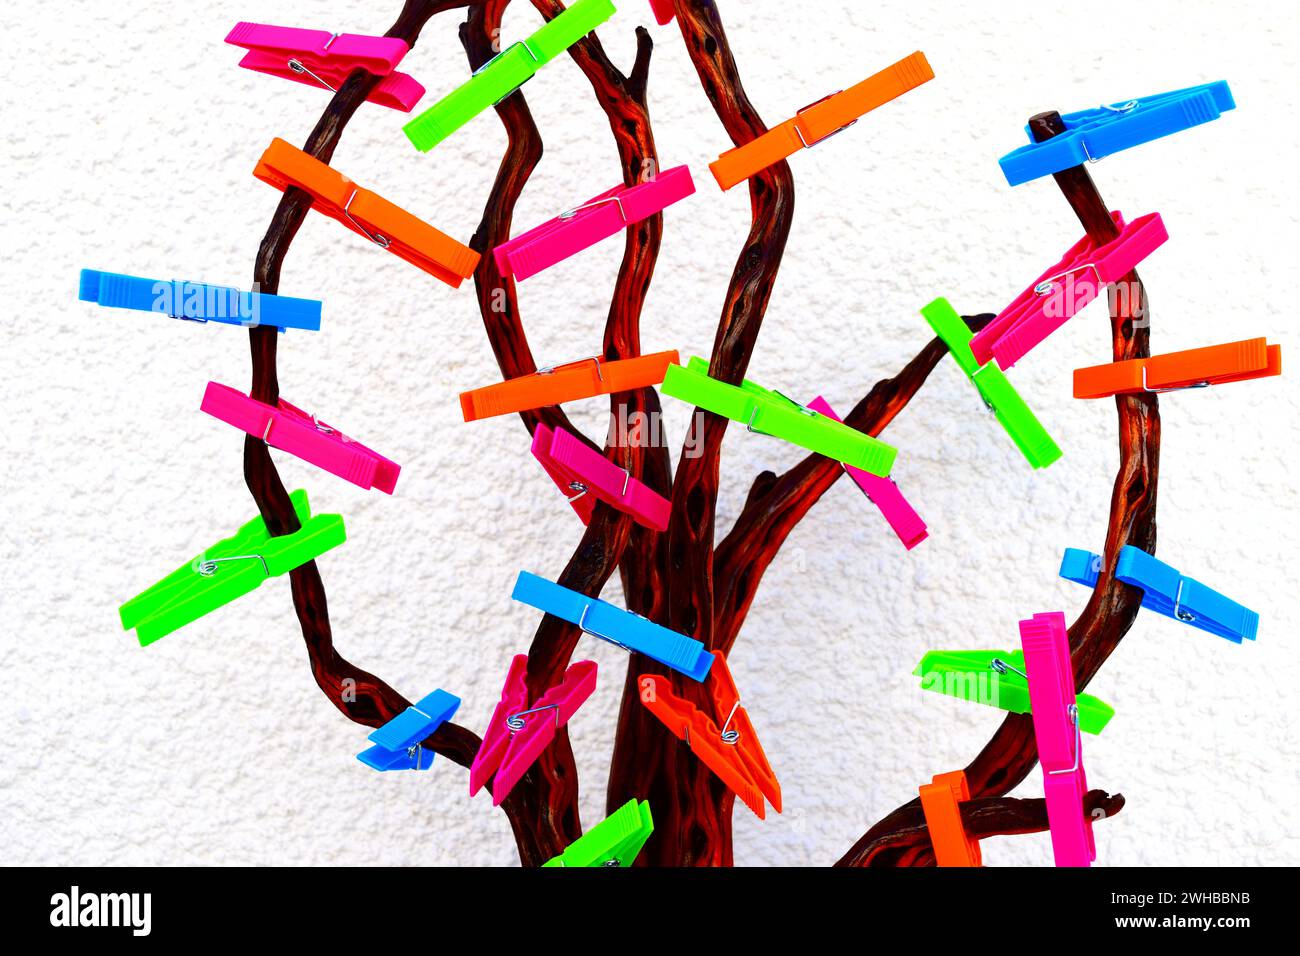 Dried branches of dead wood varnished and decorated with multicolored plastic pegs.Background is white. Stock Photo